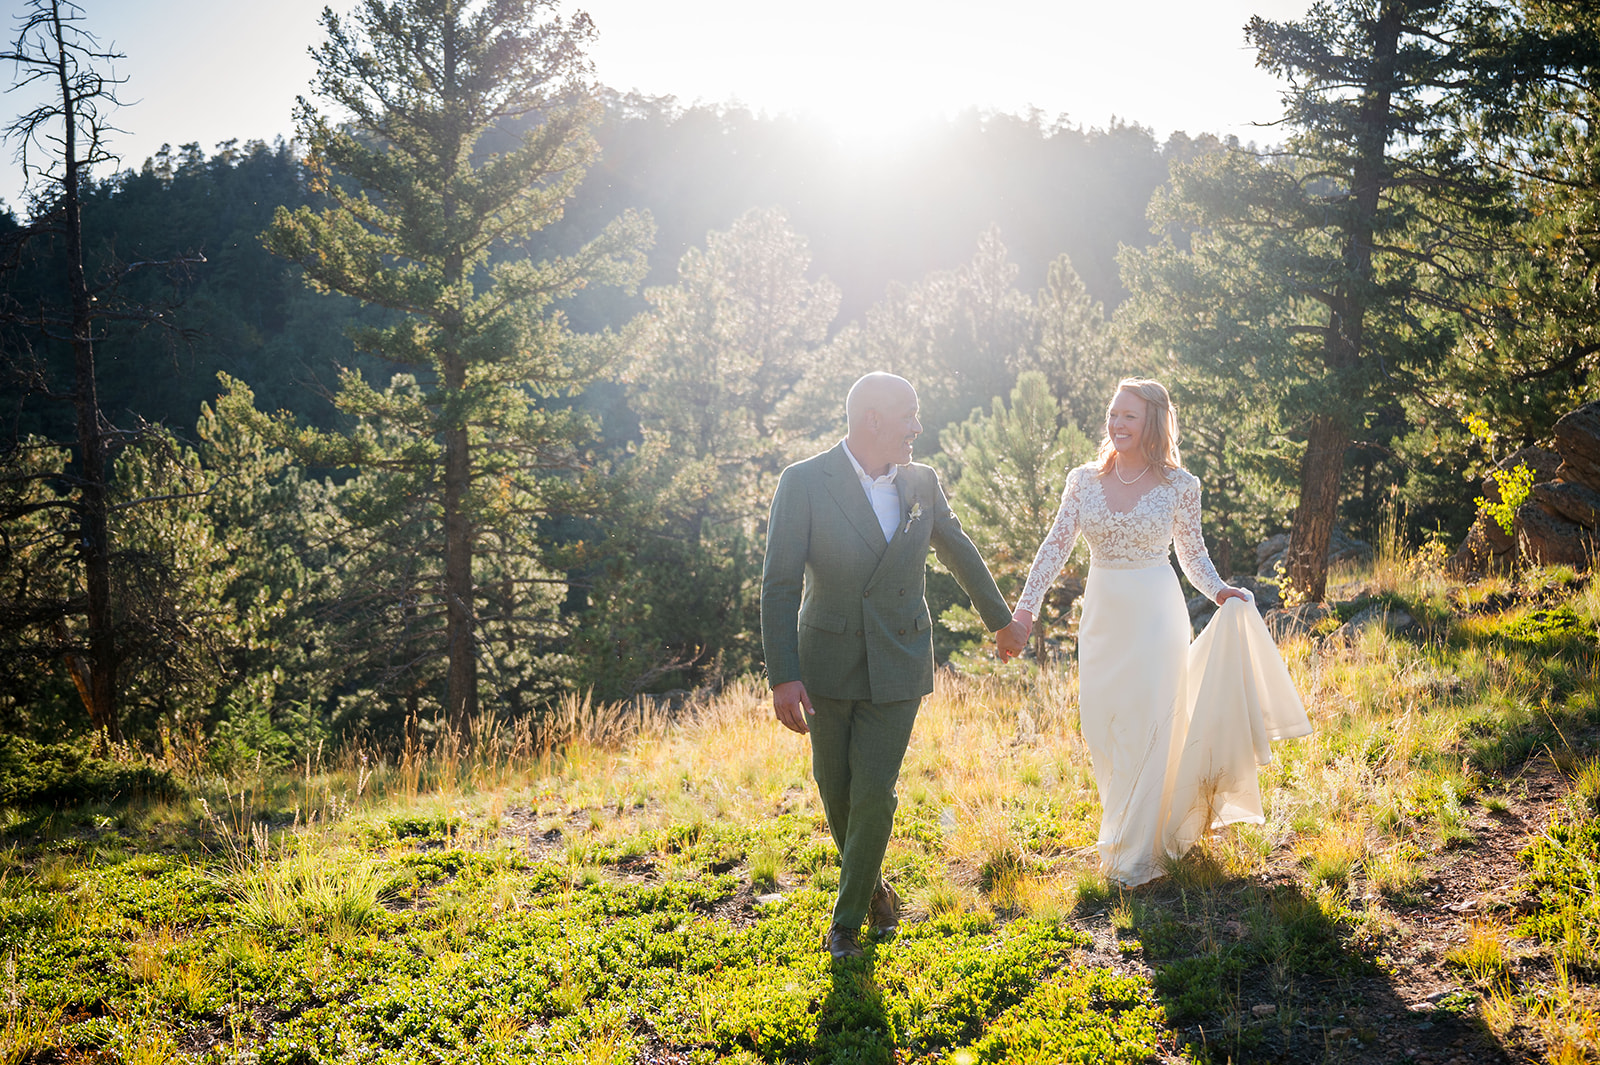 The bride and groom walk hand-in-hand toward the camera with the sun setting behind them.